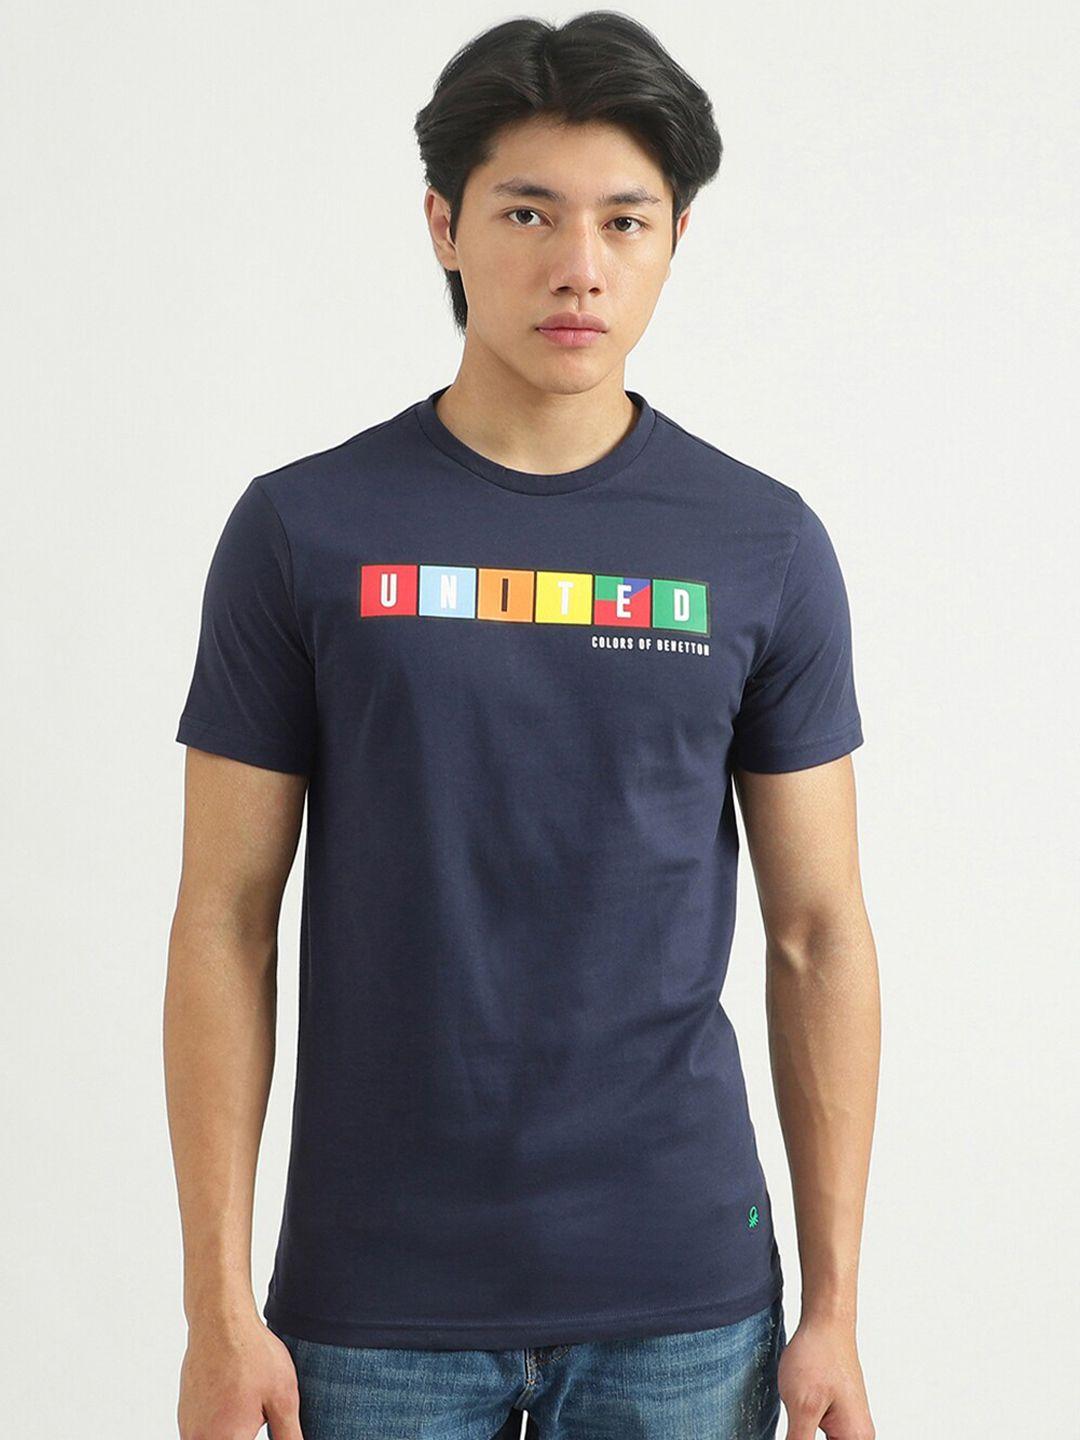 united colors of benetton men navy blue printed round neck t-shirt